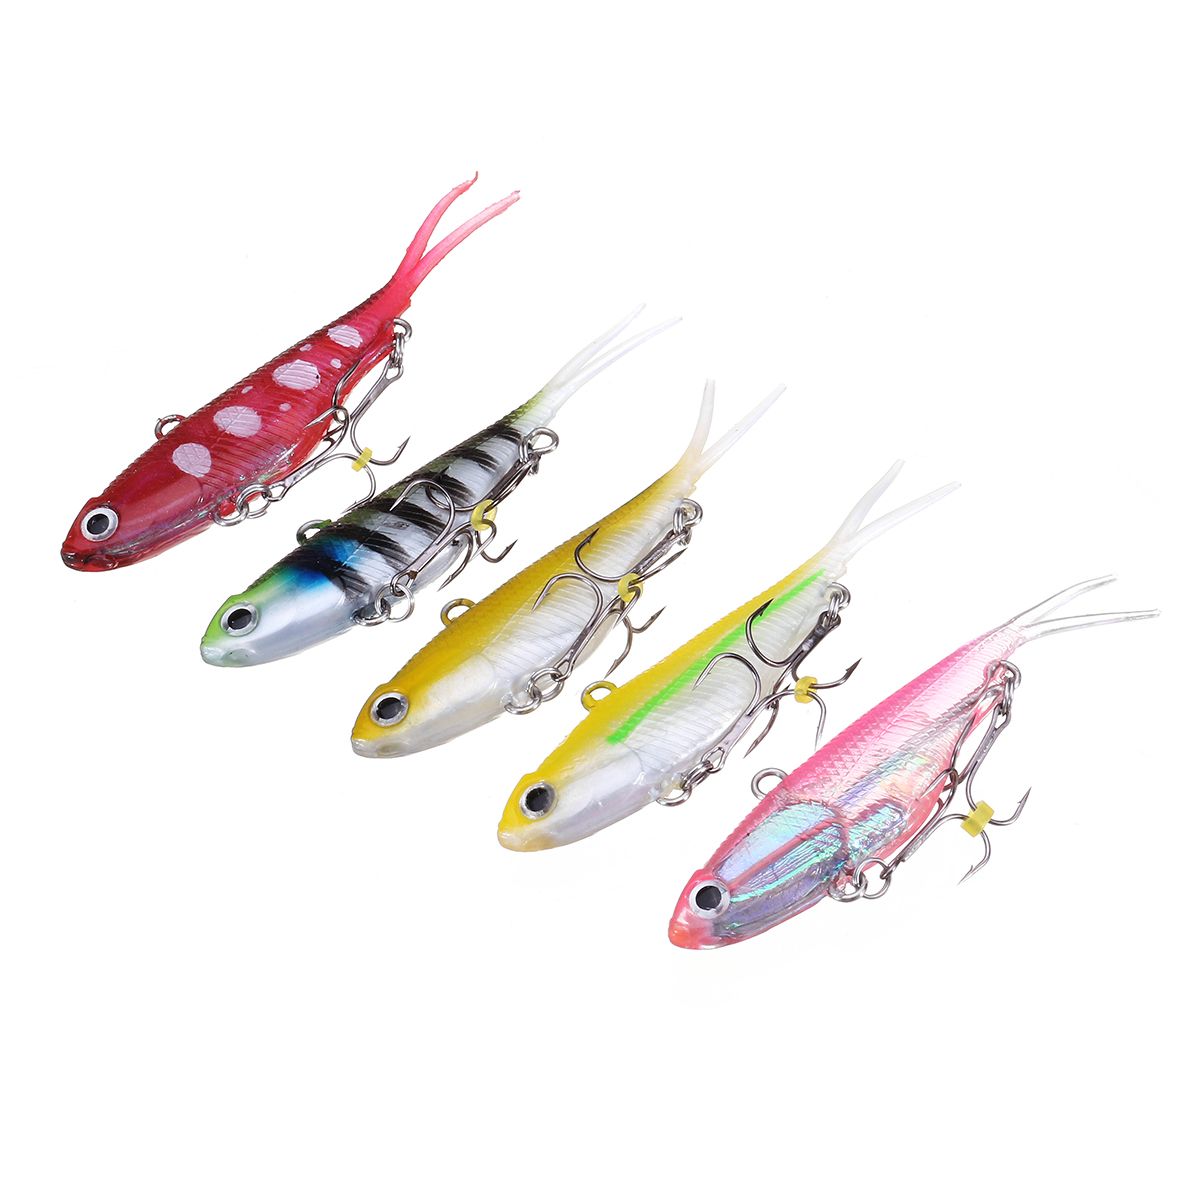 5PcsSet-95cm-Fishing-Lure-Spinners-Plugs-Spoons-Soft-Bait-Pike-Bream-1553559